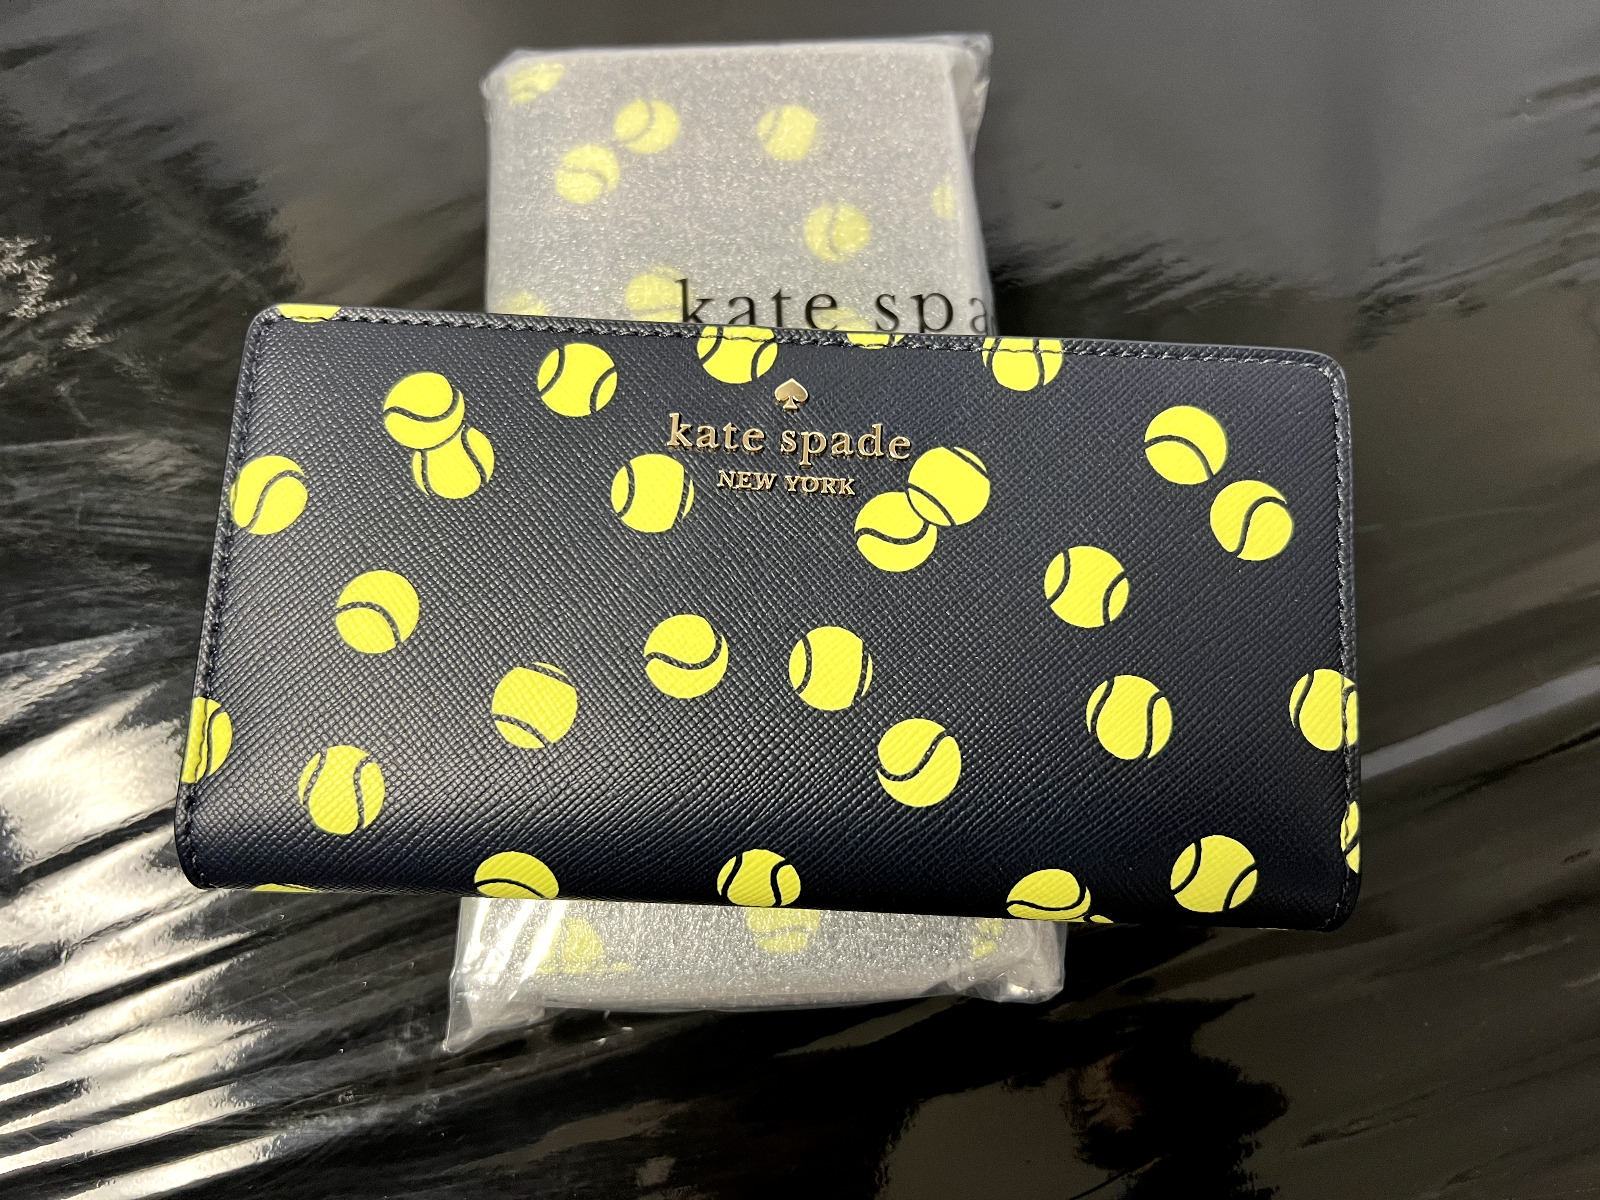 Kate Spade Logo Wallet Black Gold Luxe    Baseball  (nice gift for mother's day)